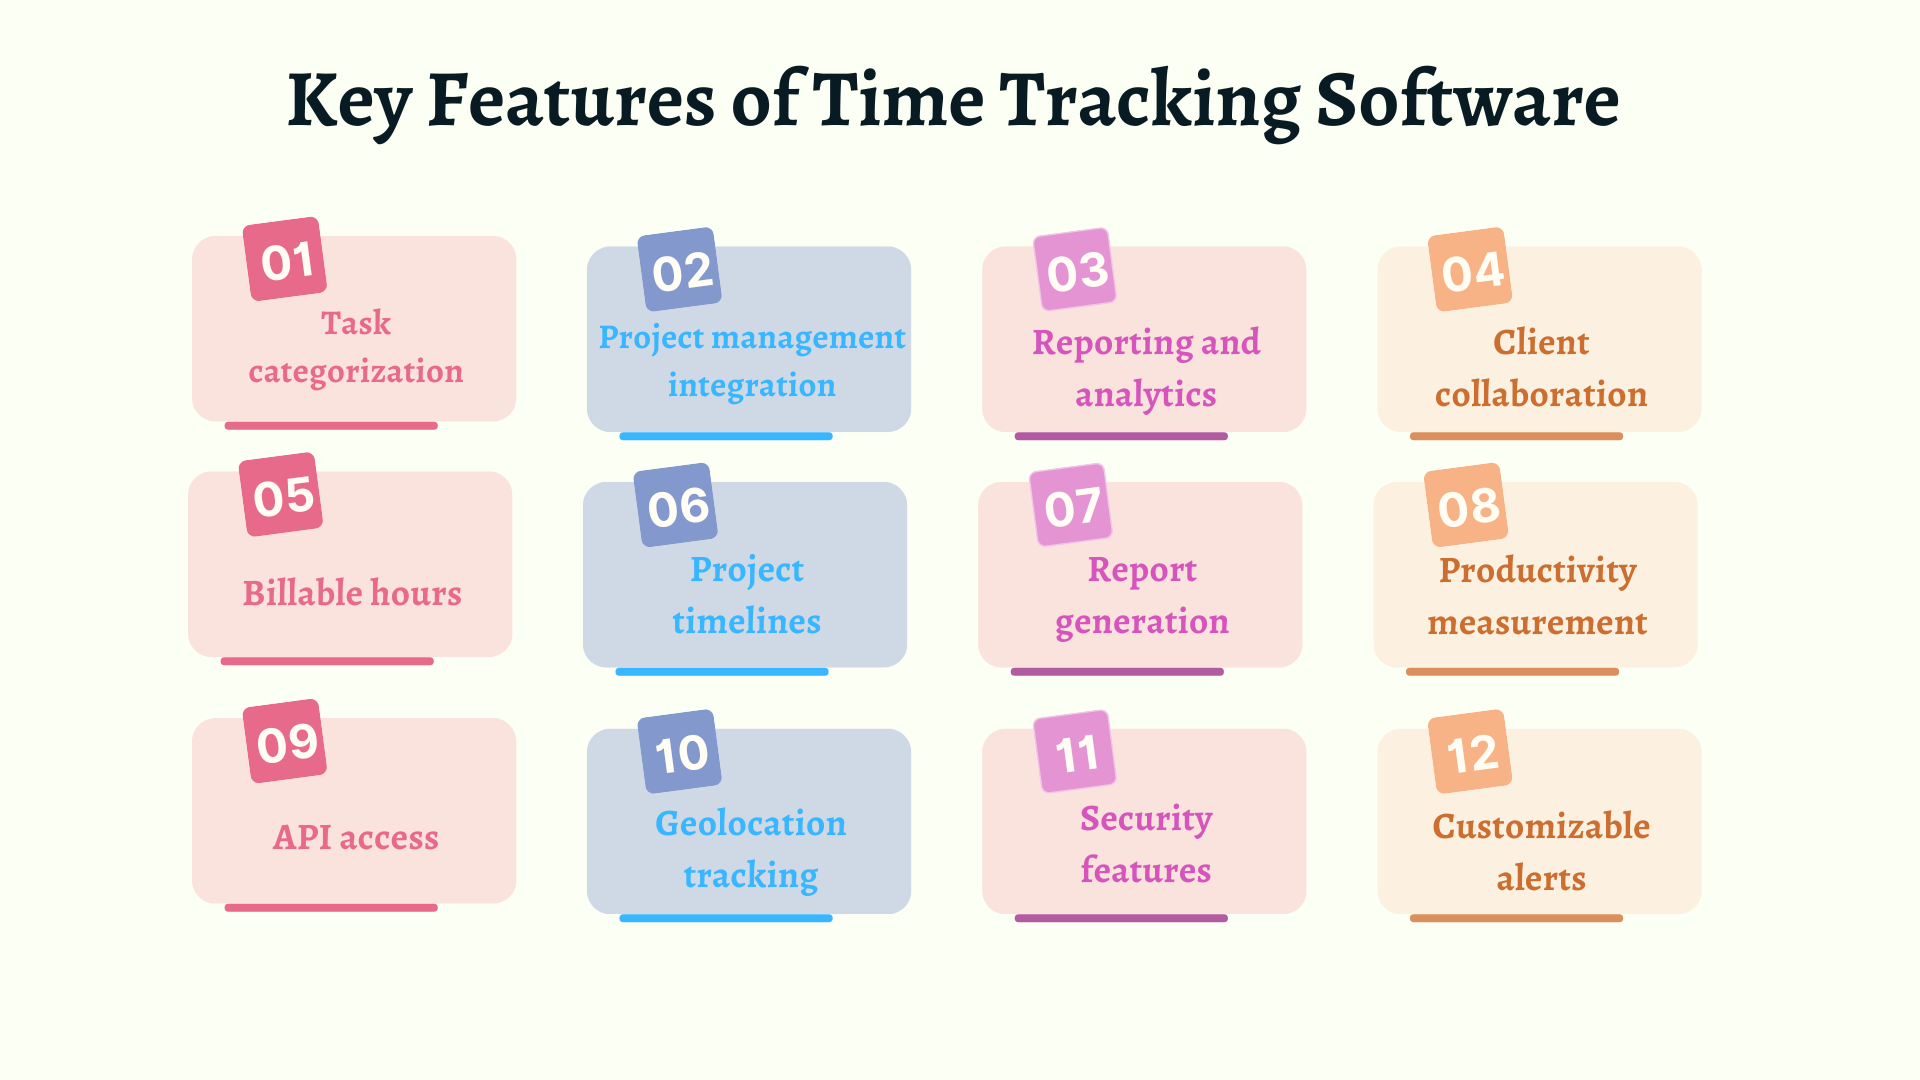 Key Features of Time Tracking Software